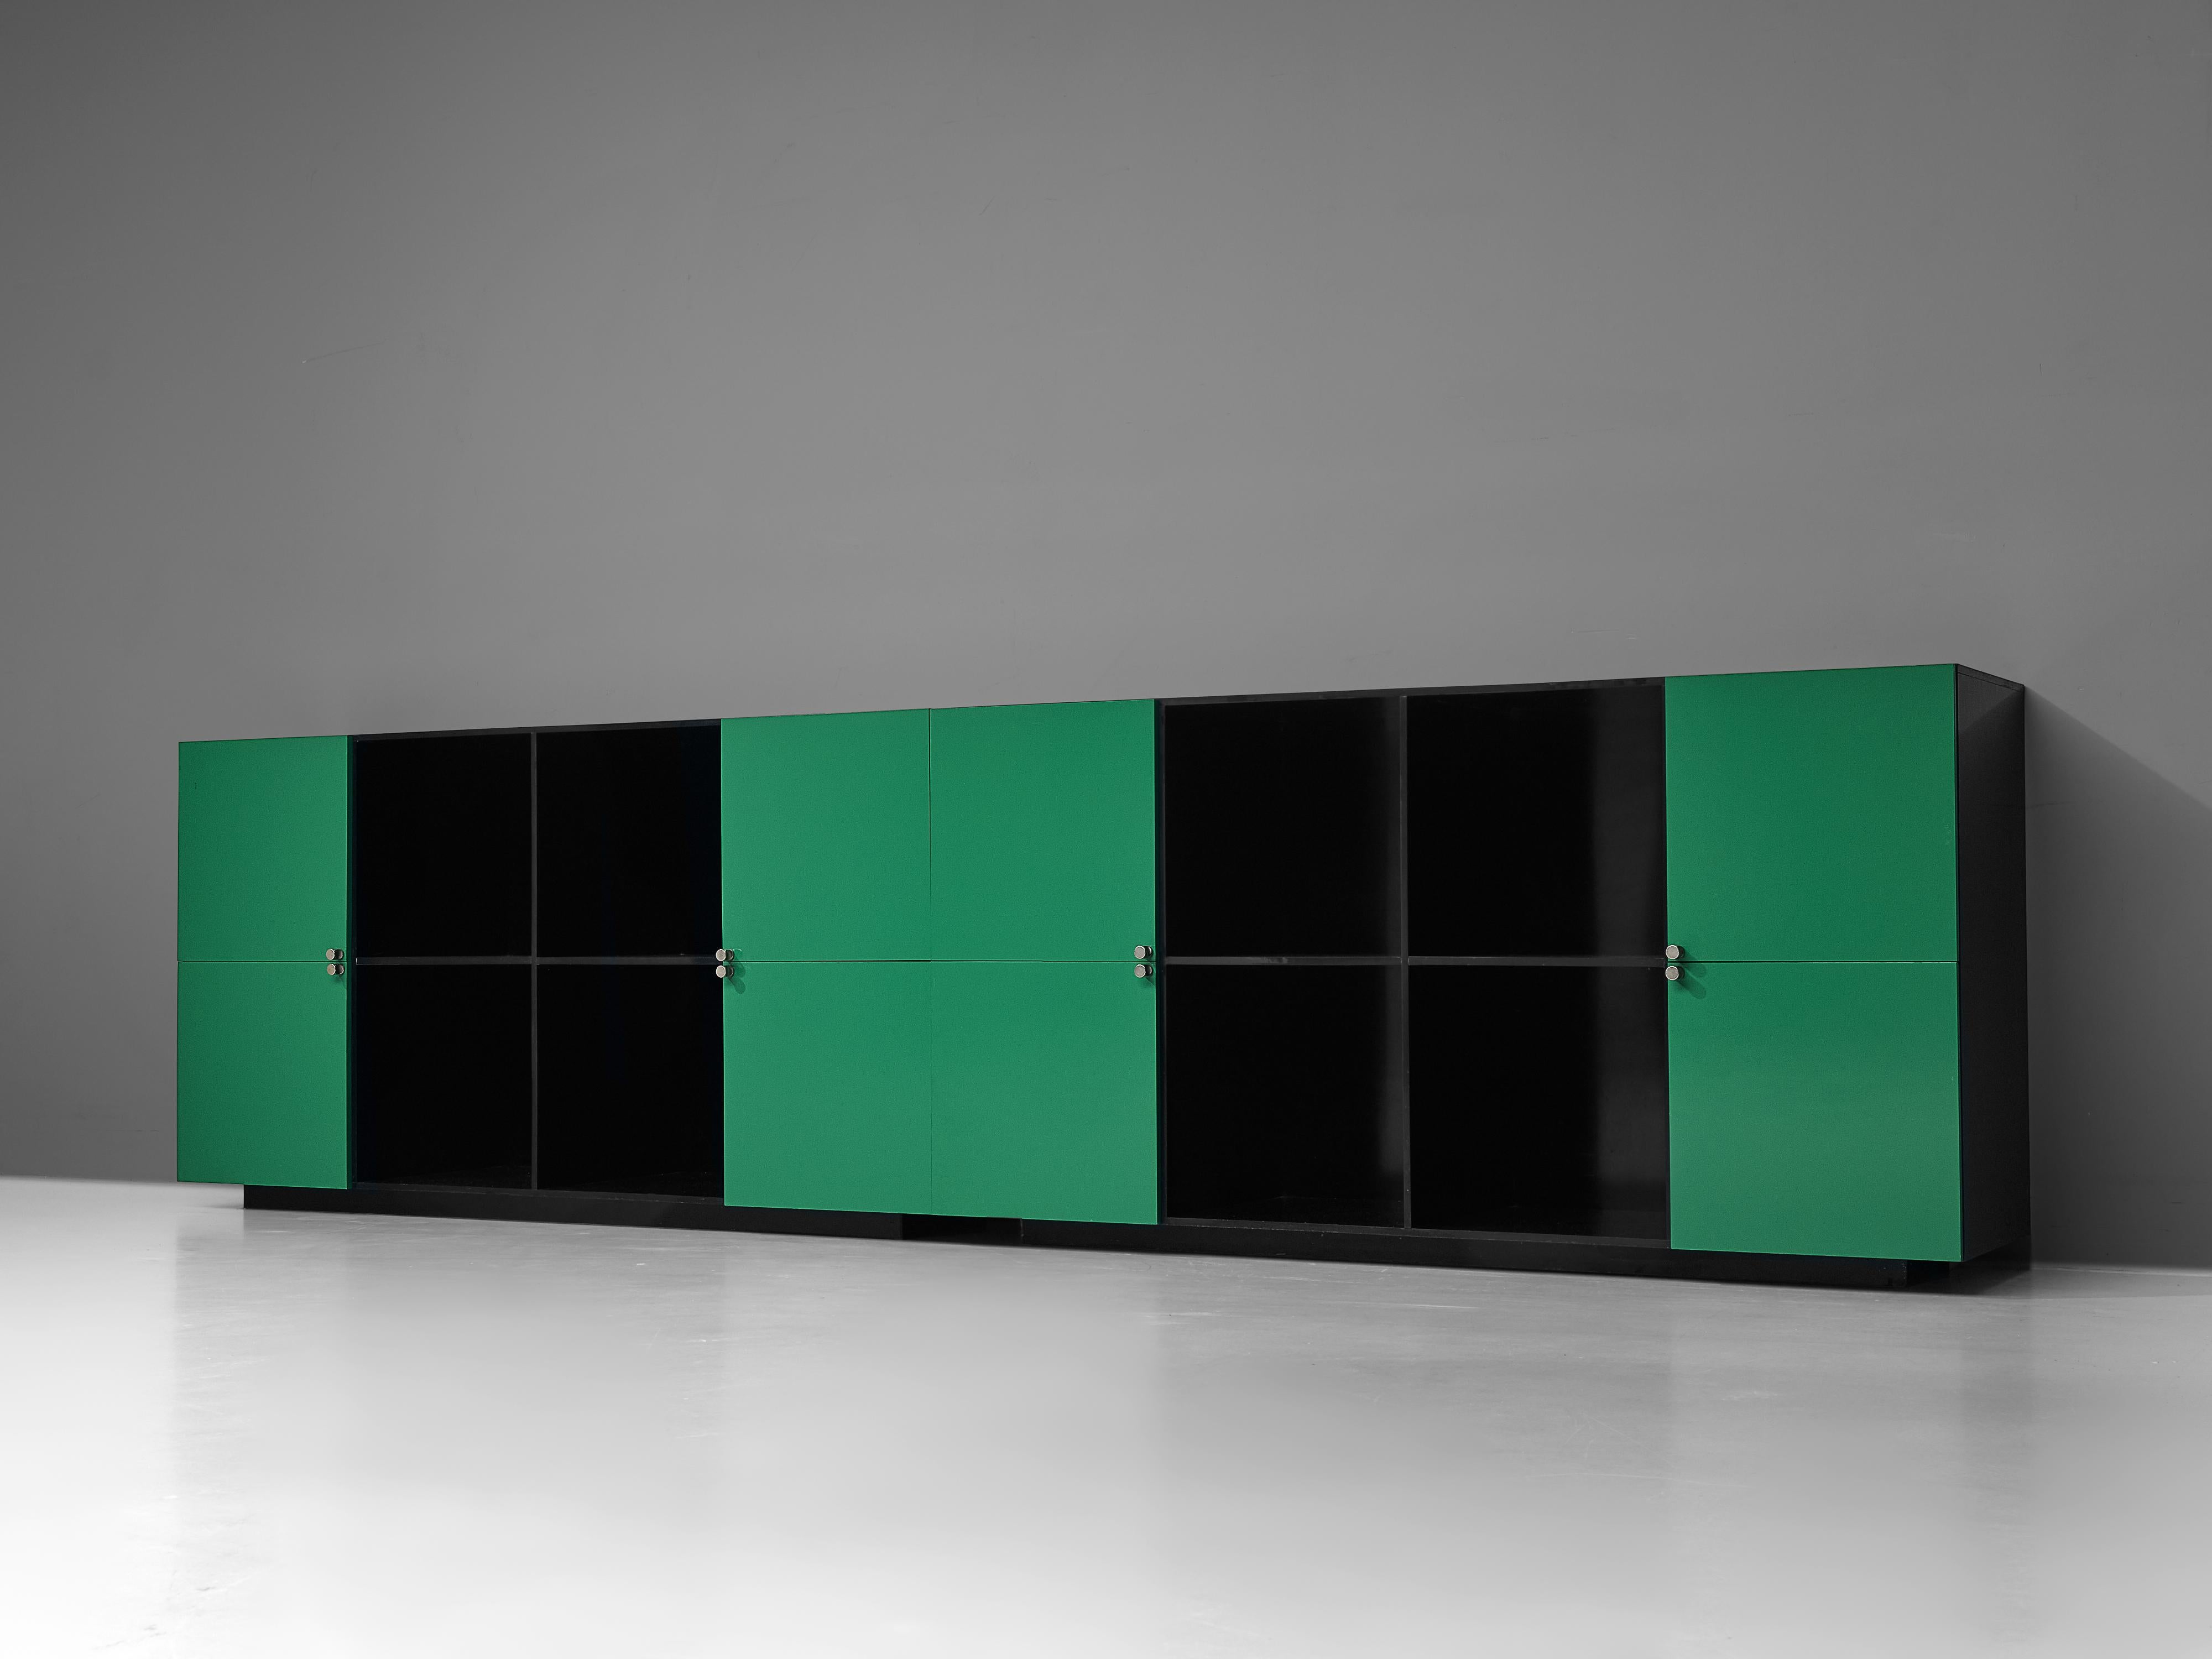 Luigi Saccardo, 'Topline' sideboard, laminated wood, metal, Italy, circa 1976.

This outspoken sideboard is designed as part of the ‘Topline’ series by the Italian designer Luigi Saccardo. This well-designed piece is based on a elongated